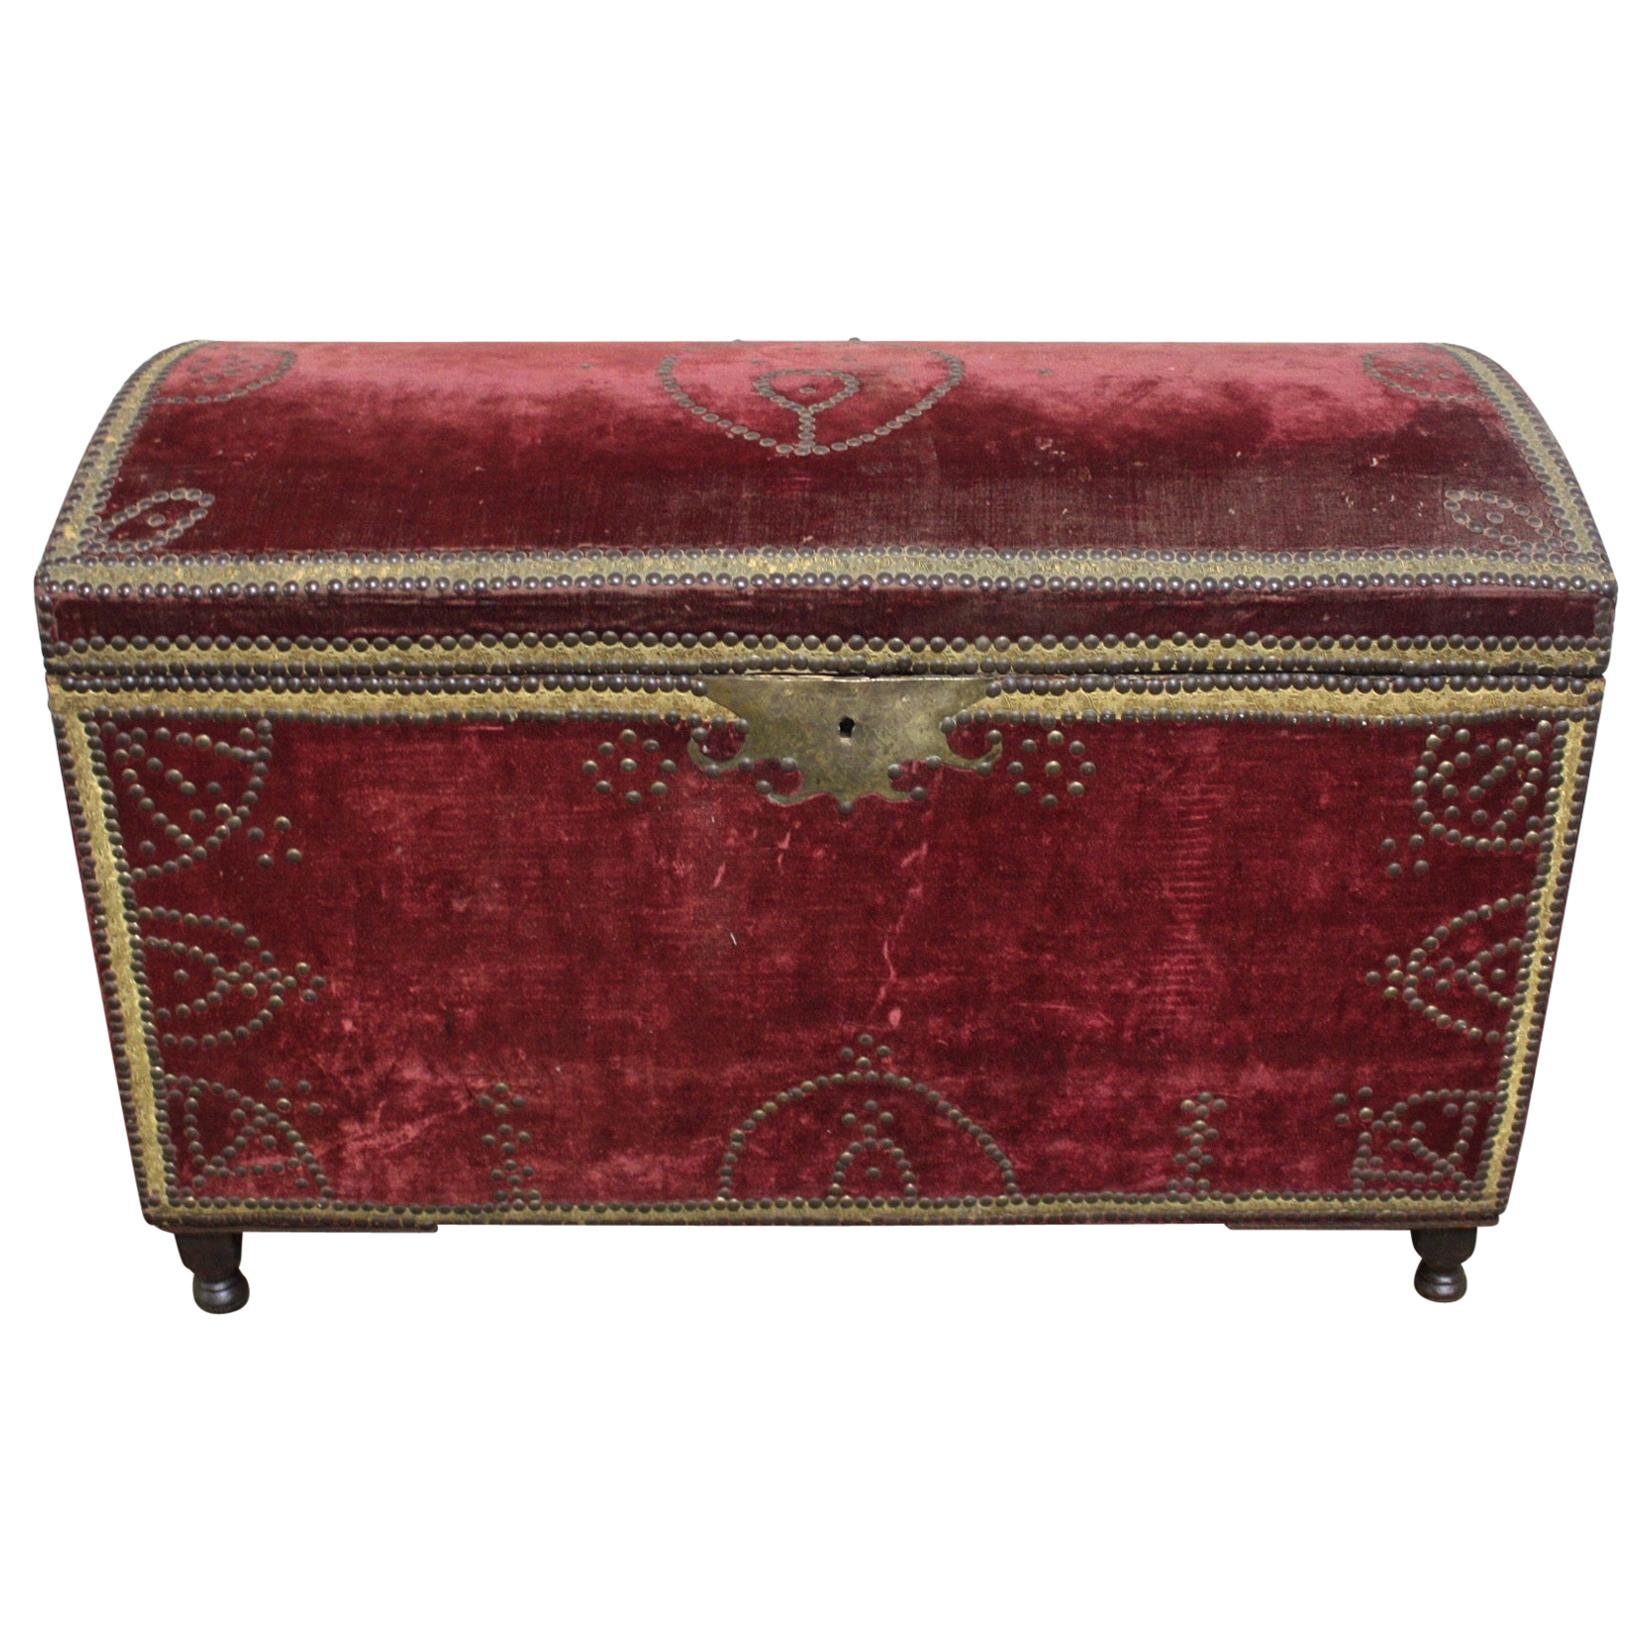 Charming 19th Century French Trunk or Blanket Chest